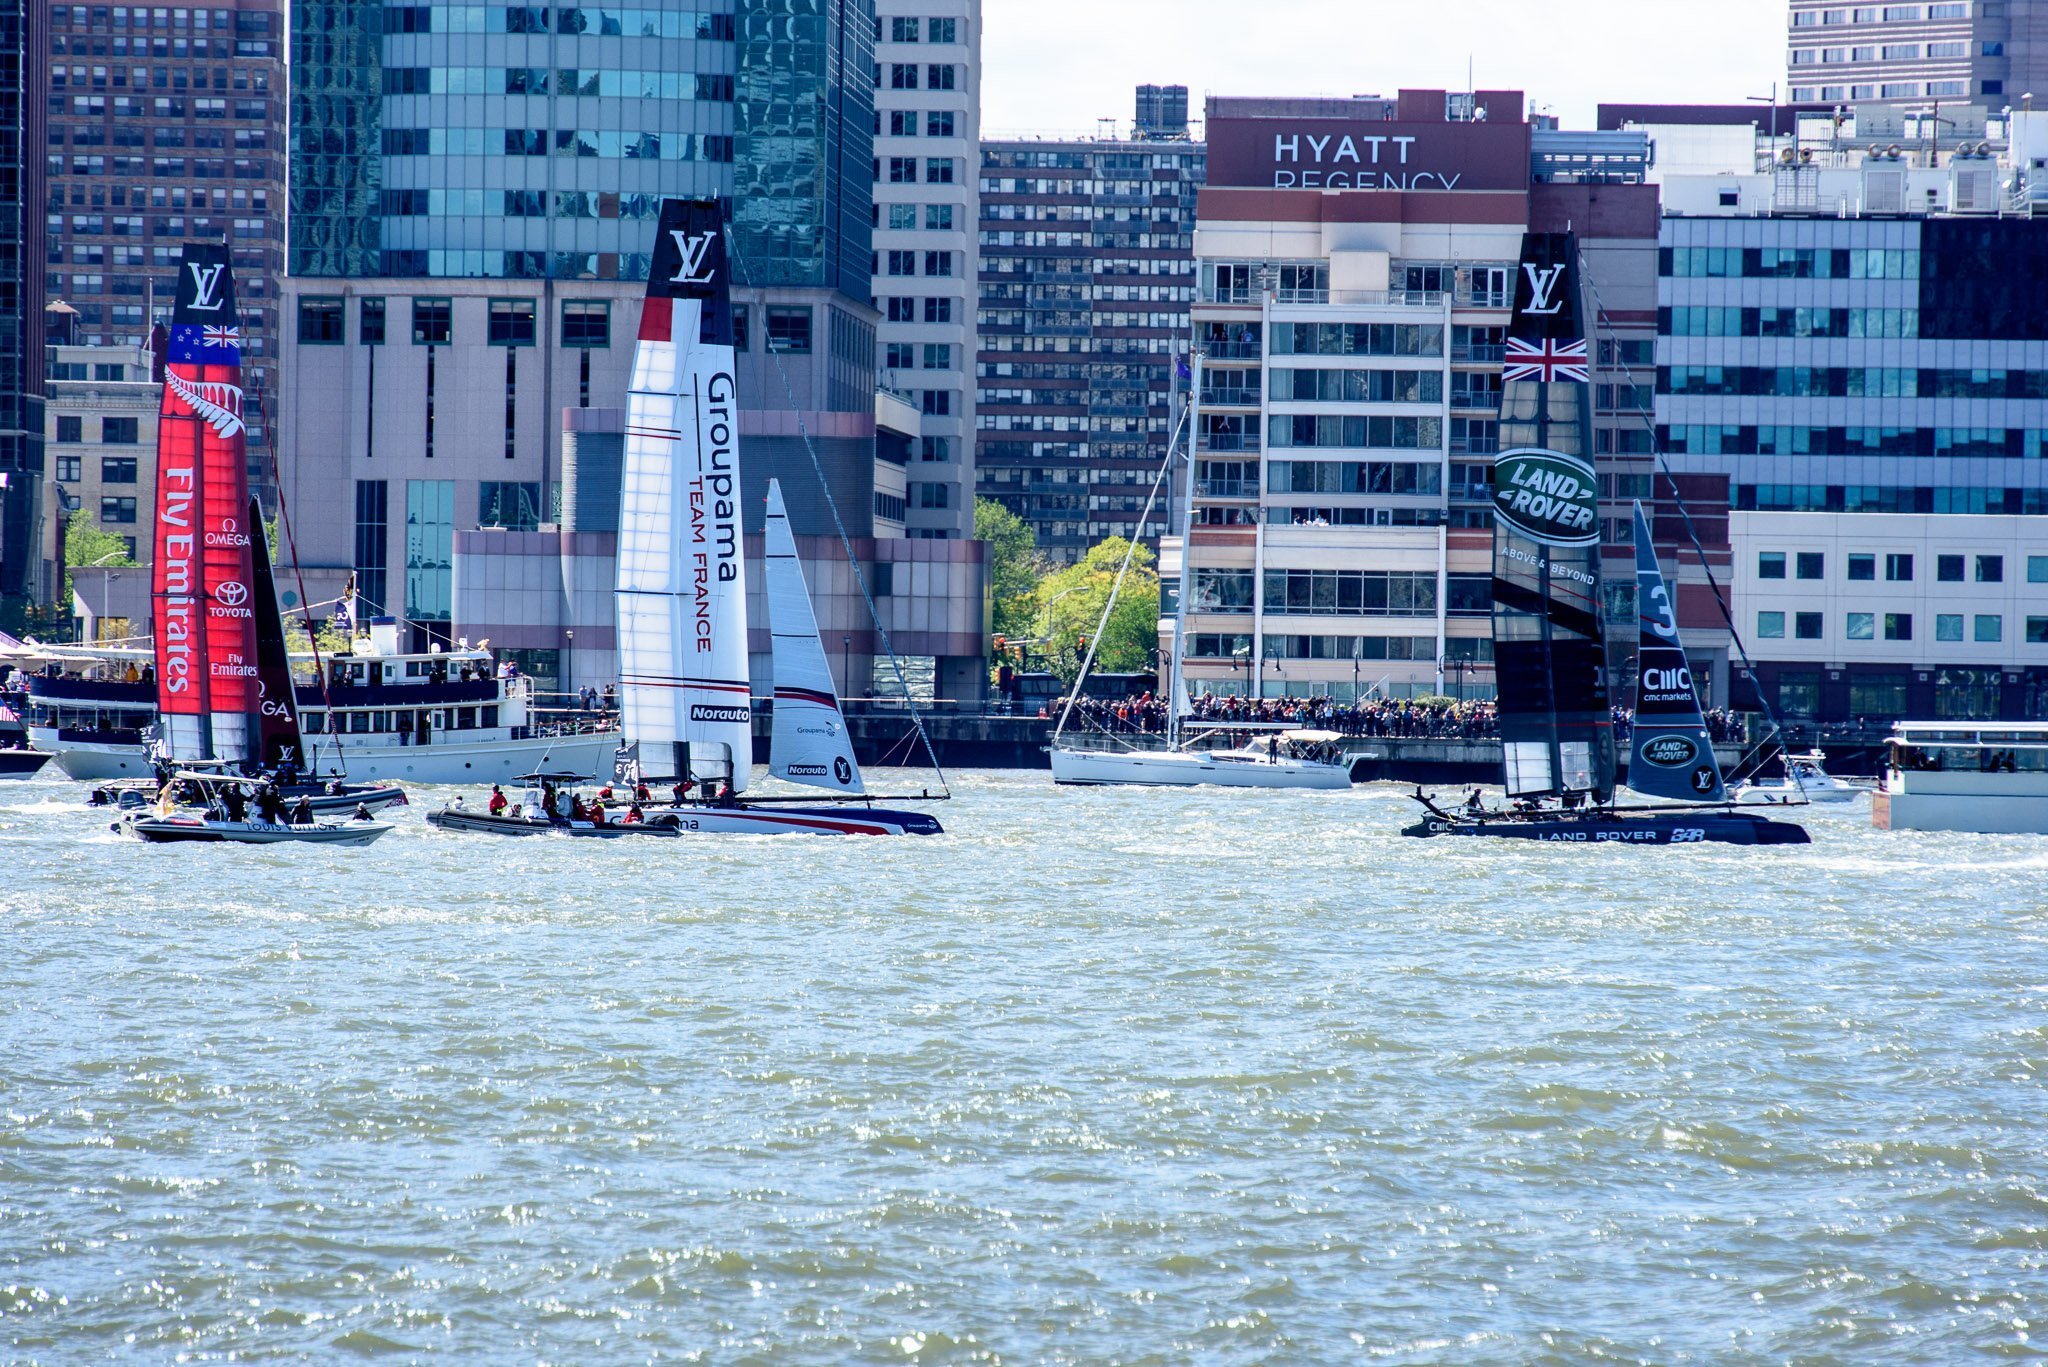 Fly Emirates, Team France, Land Rover America's Cup